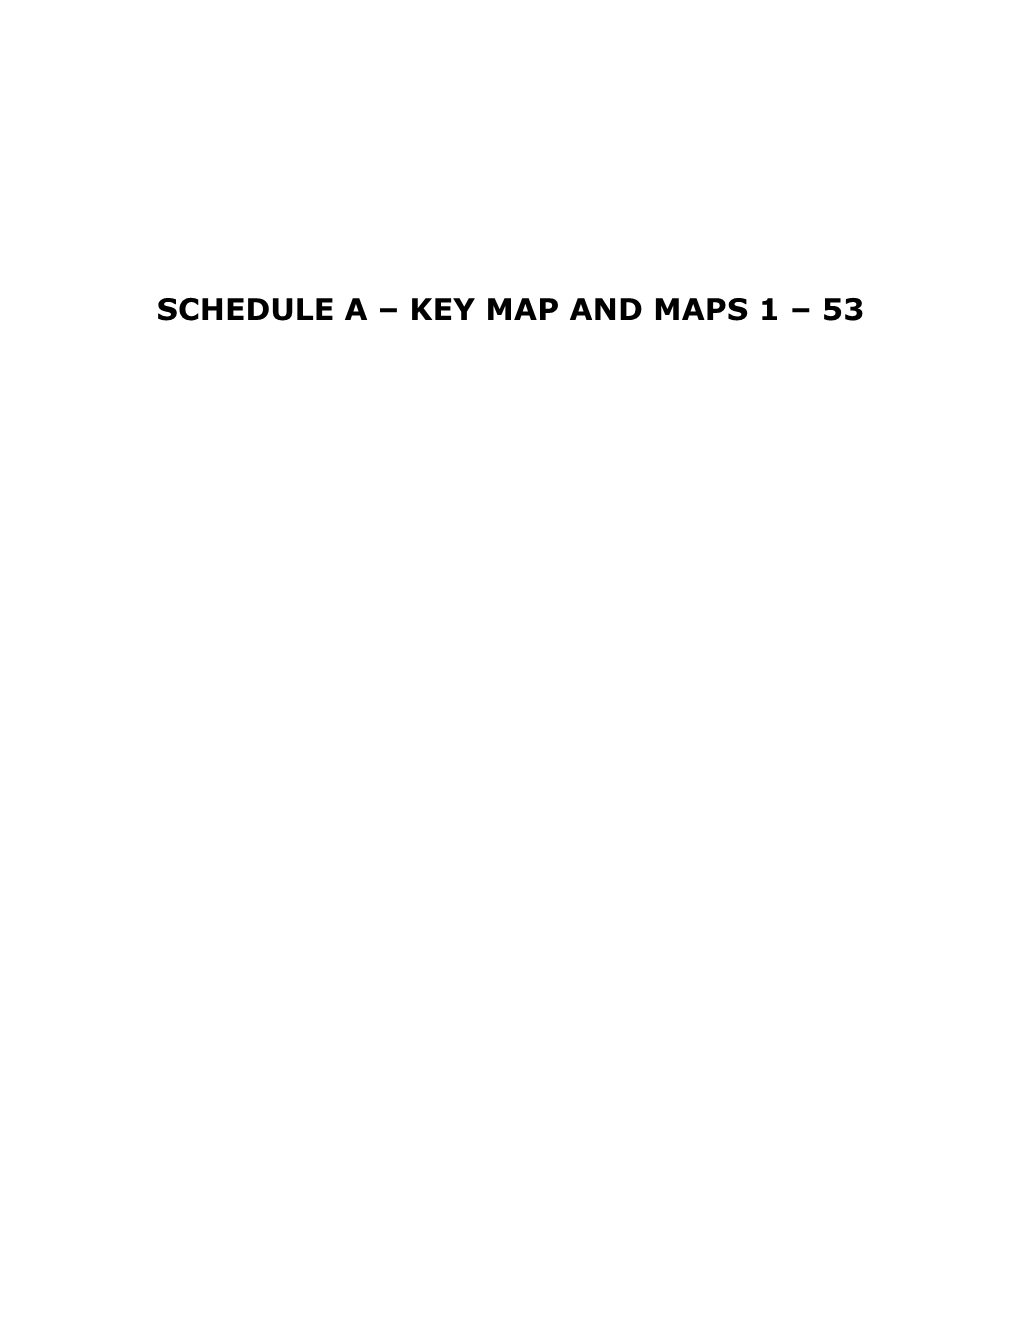 Schedule a – Key Map and Maps 1 – 53